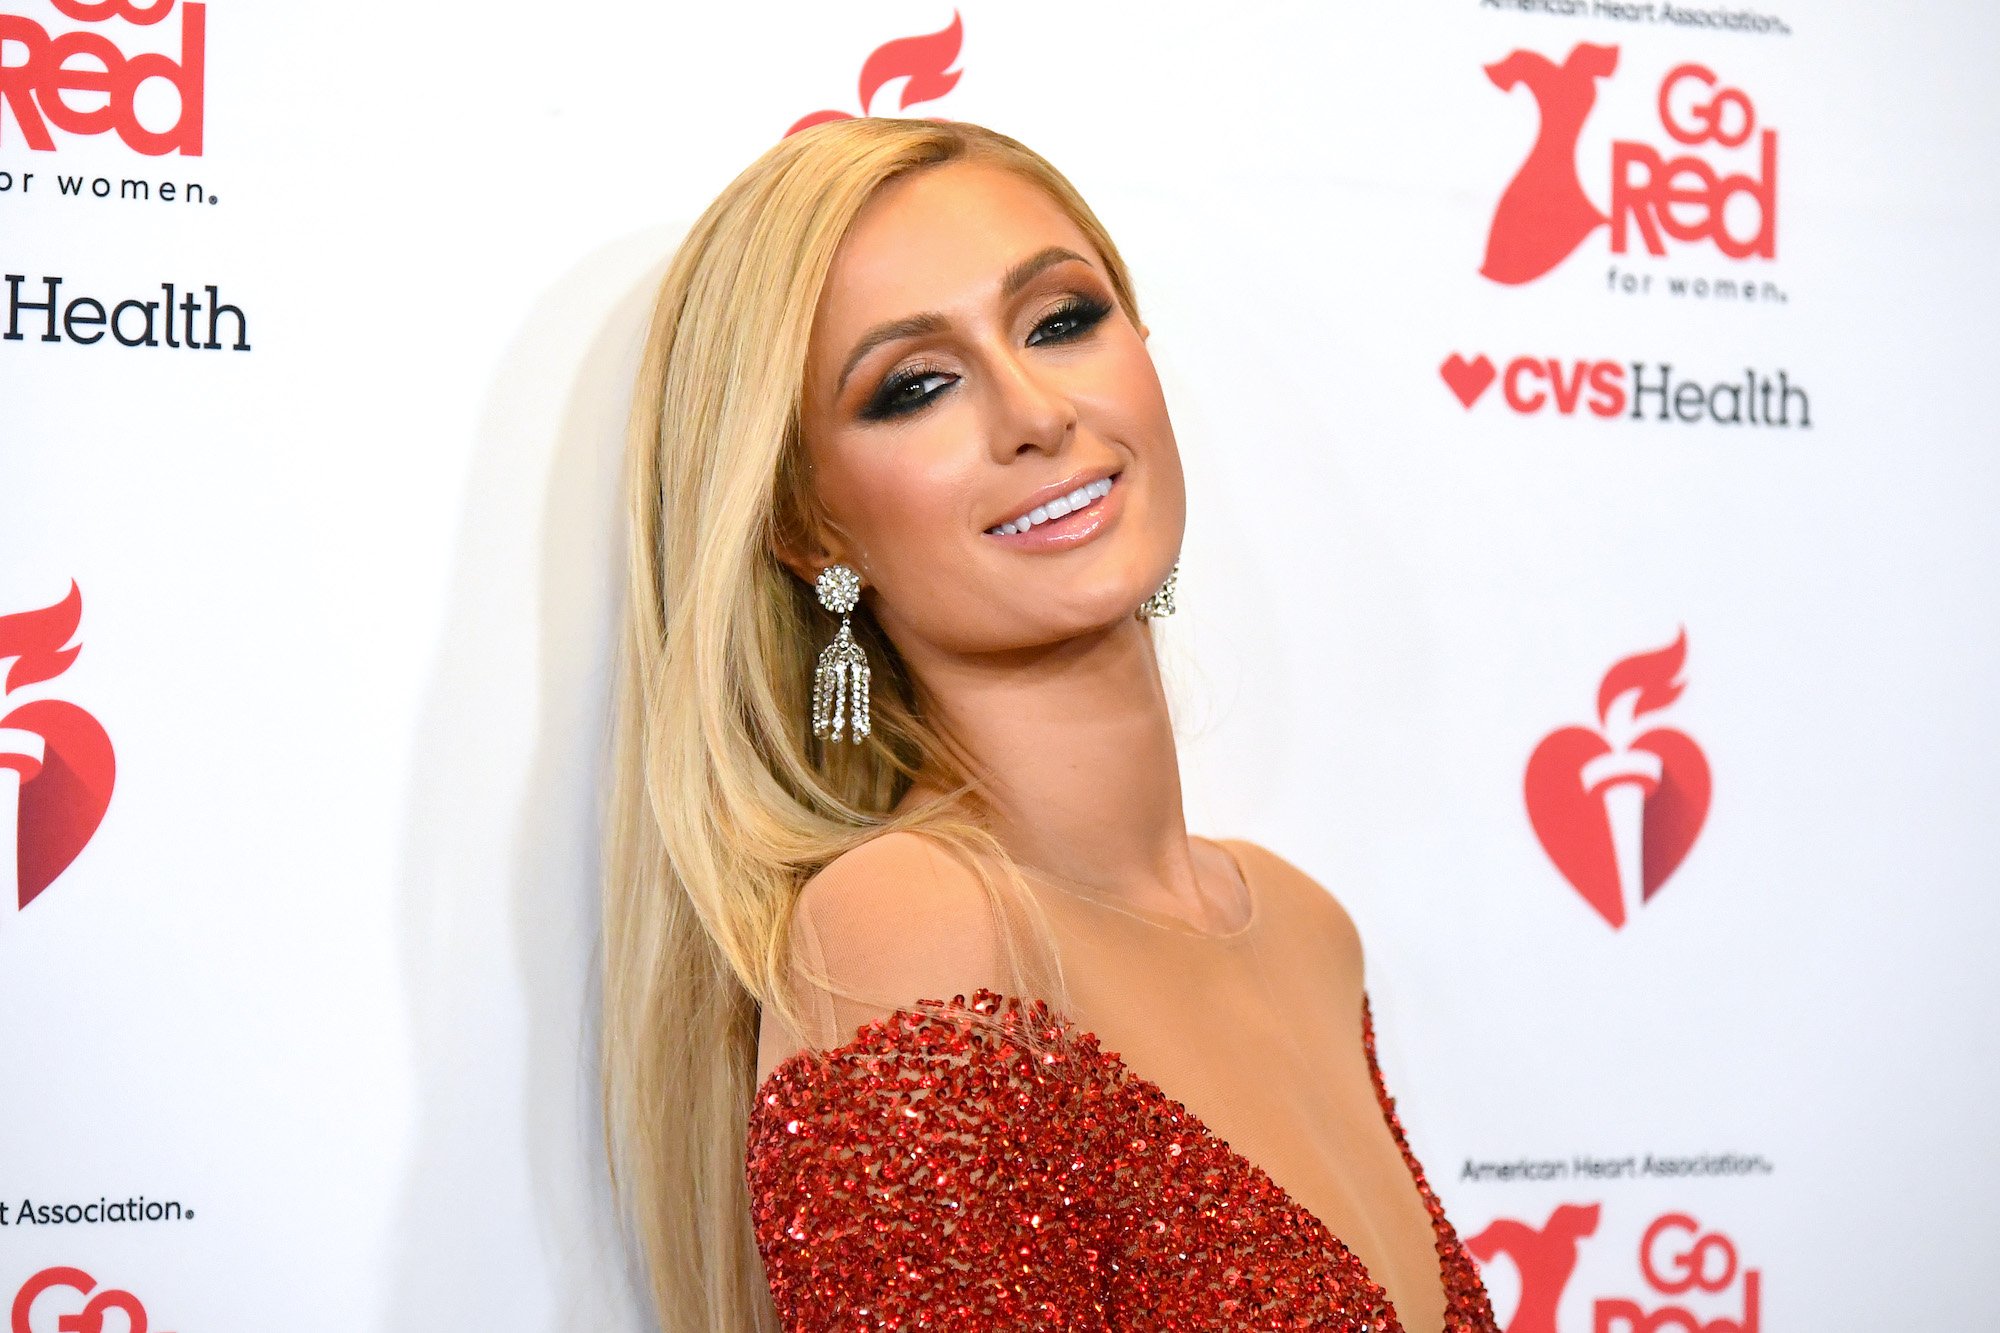 Paris Hilton smiling in front of a white background with repeating red logos